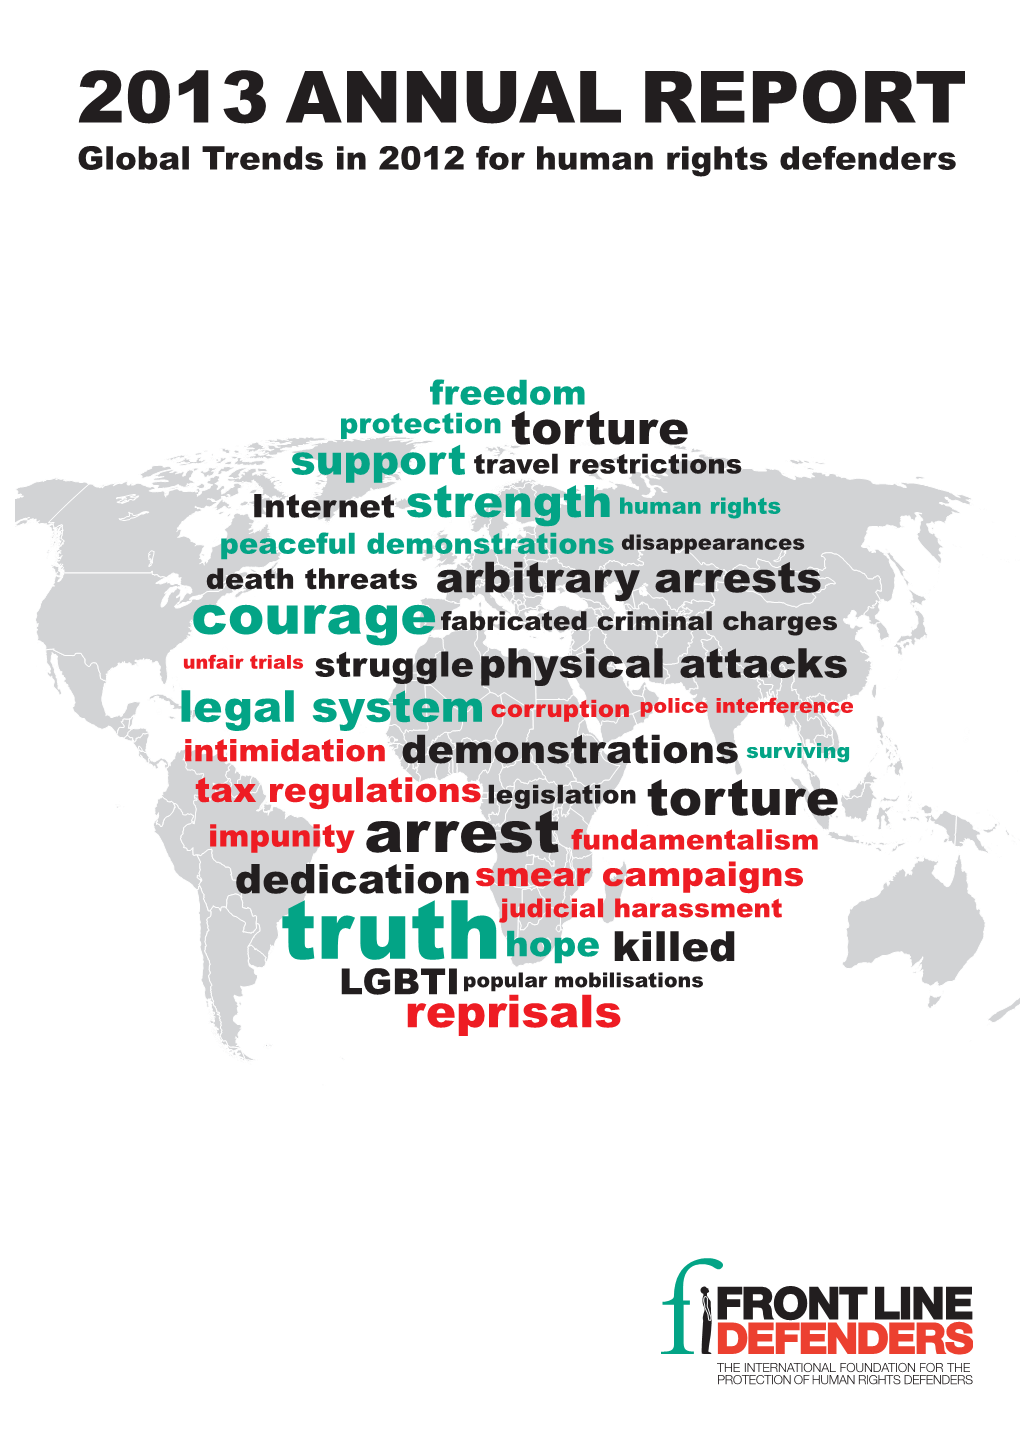 2013 Annual Report: Global Trends in 2012 for Human Rights Defenders